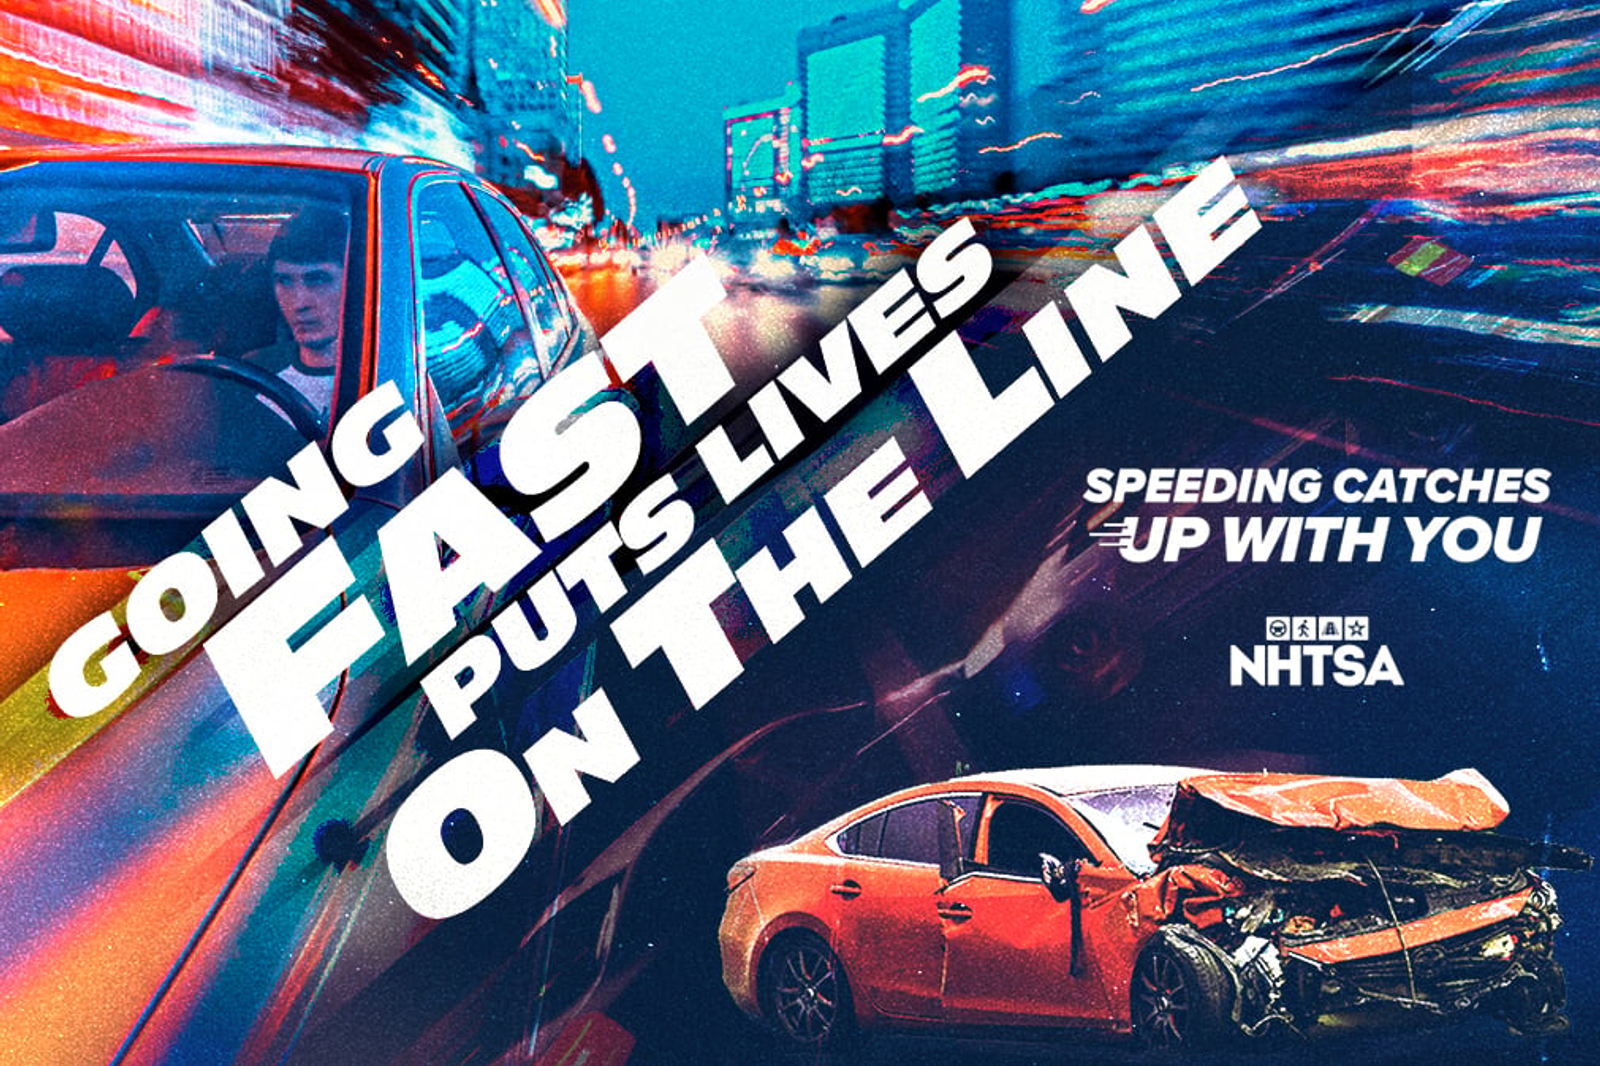 video, government, watch: nhtsa's latest anti-speed campaign is simple yet effective